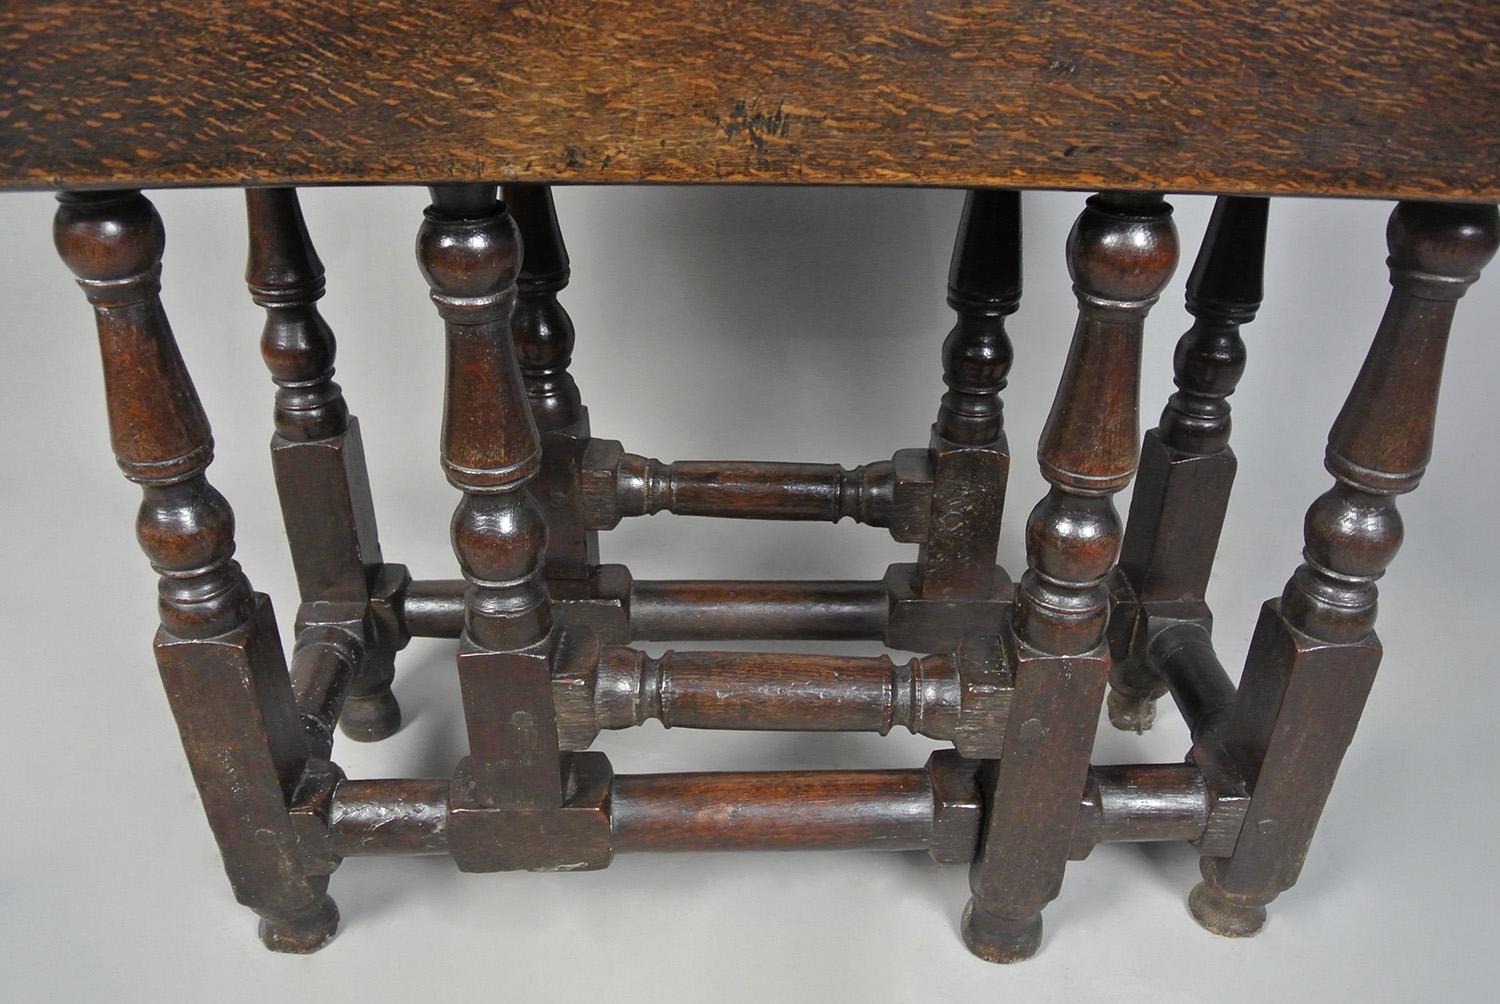 Original Queen Anne Oak Small Supper Table with Provenance c. 1700 For Sale 3